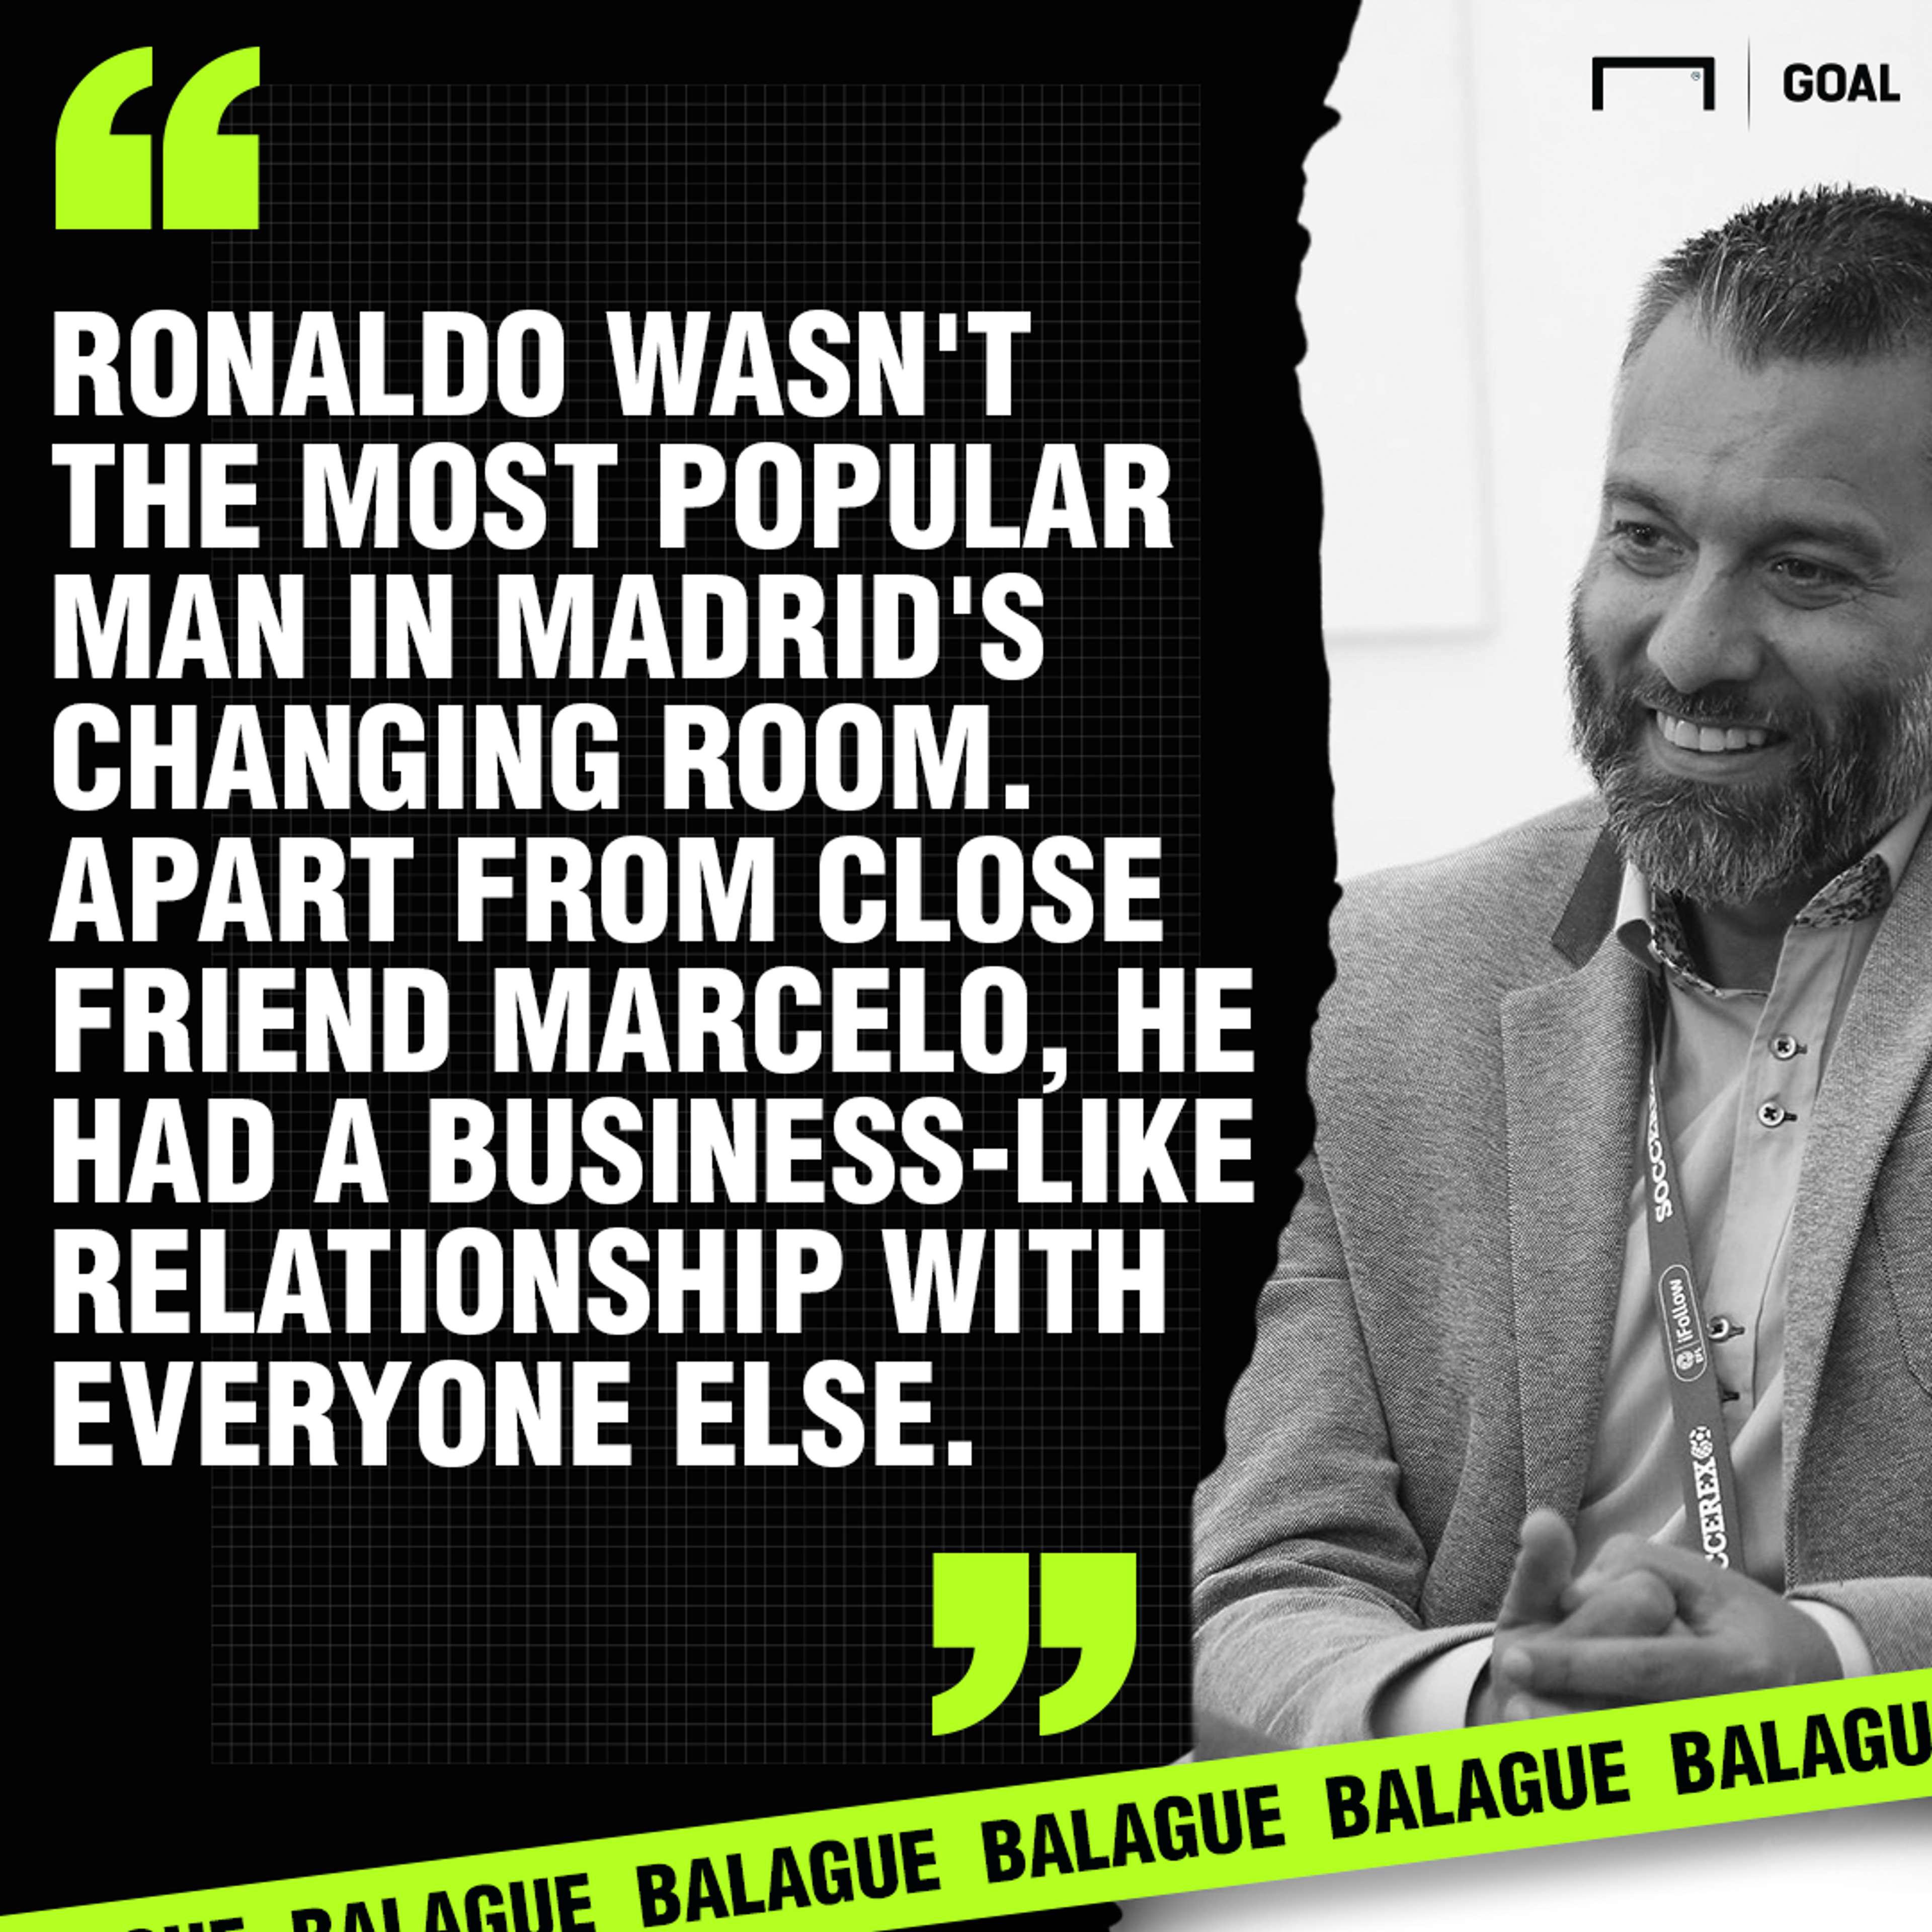 Balague pull quote 2